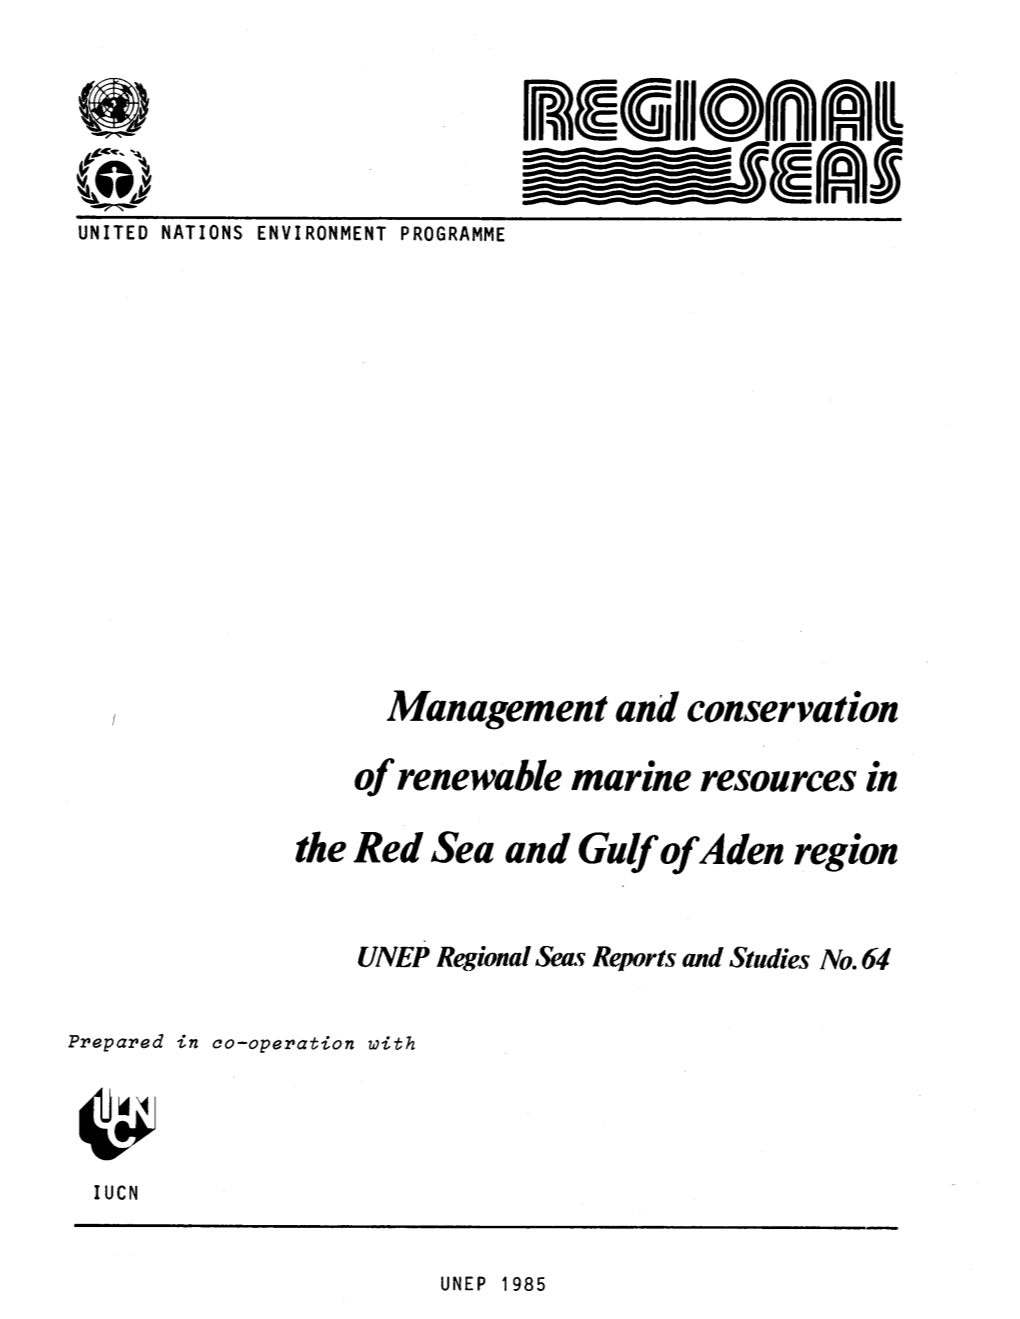 Management and Conservation of Renewable Marine Resources in the Red Sea and Guvof Aden Region